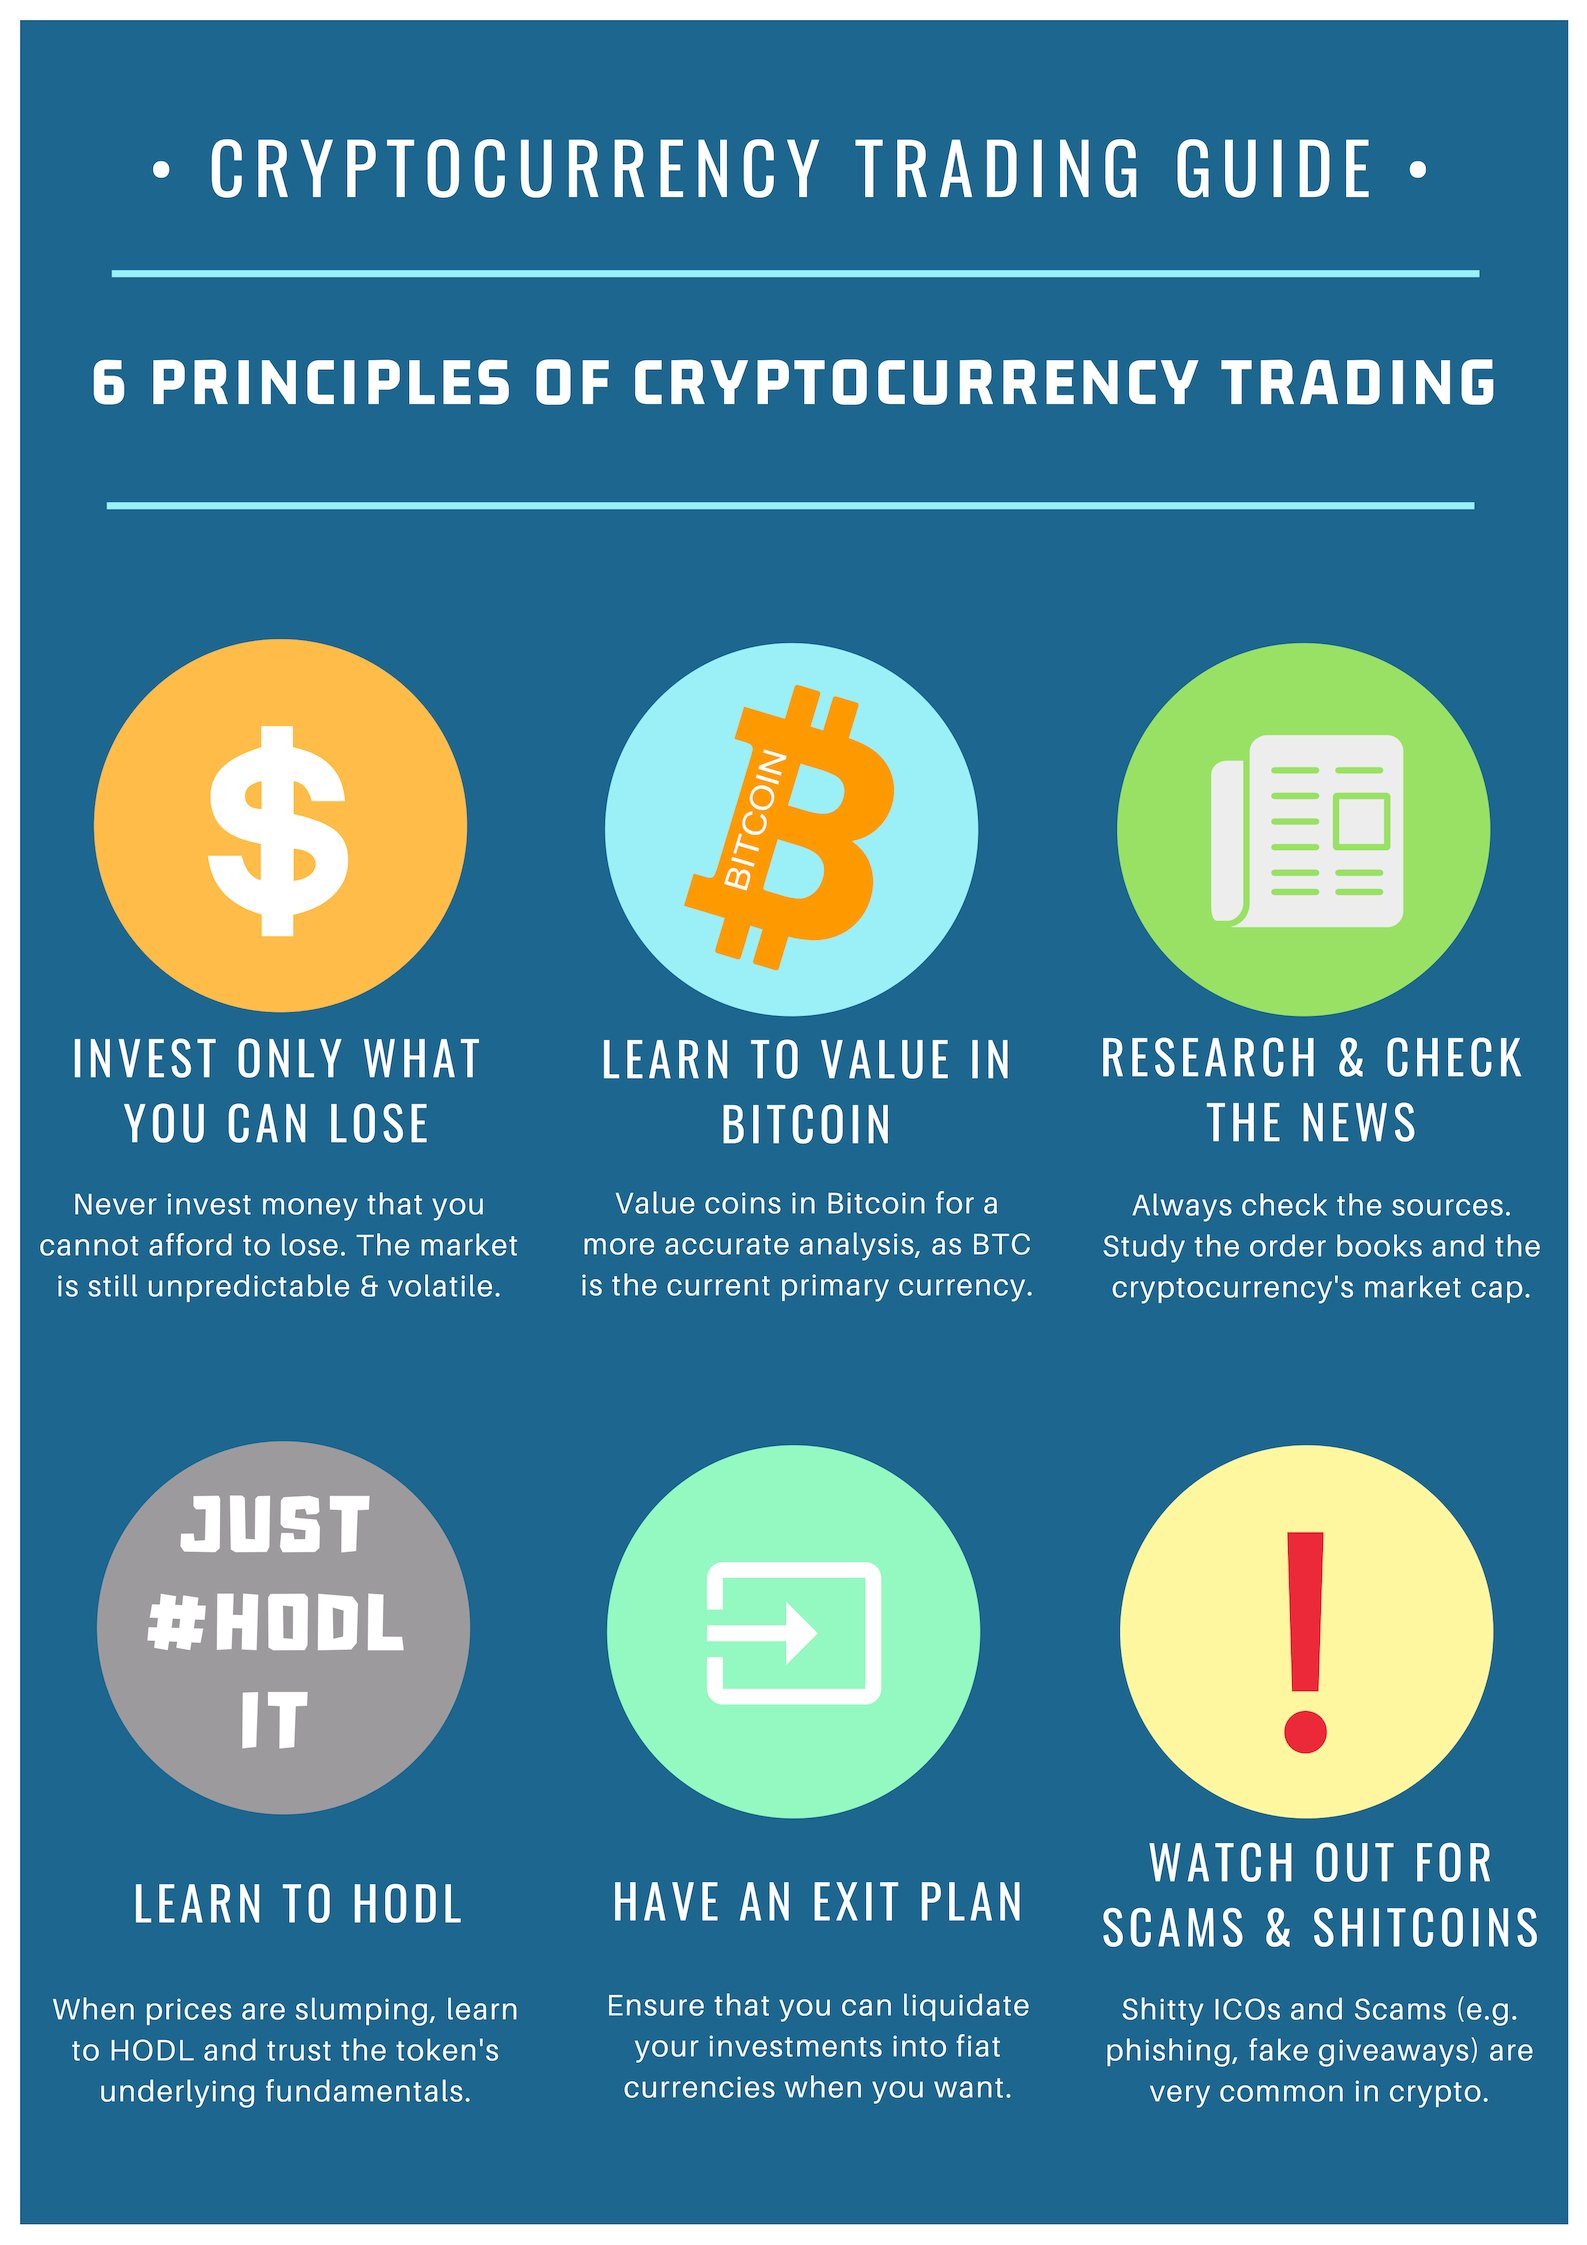 Trading-Guide-3---6-principles-trading-cryptocurrency-1